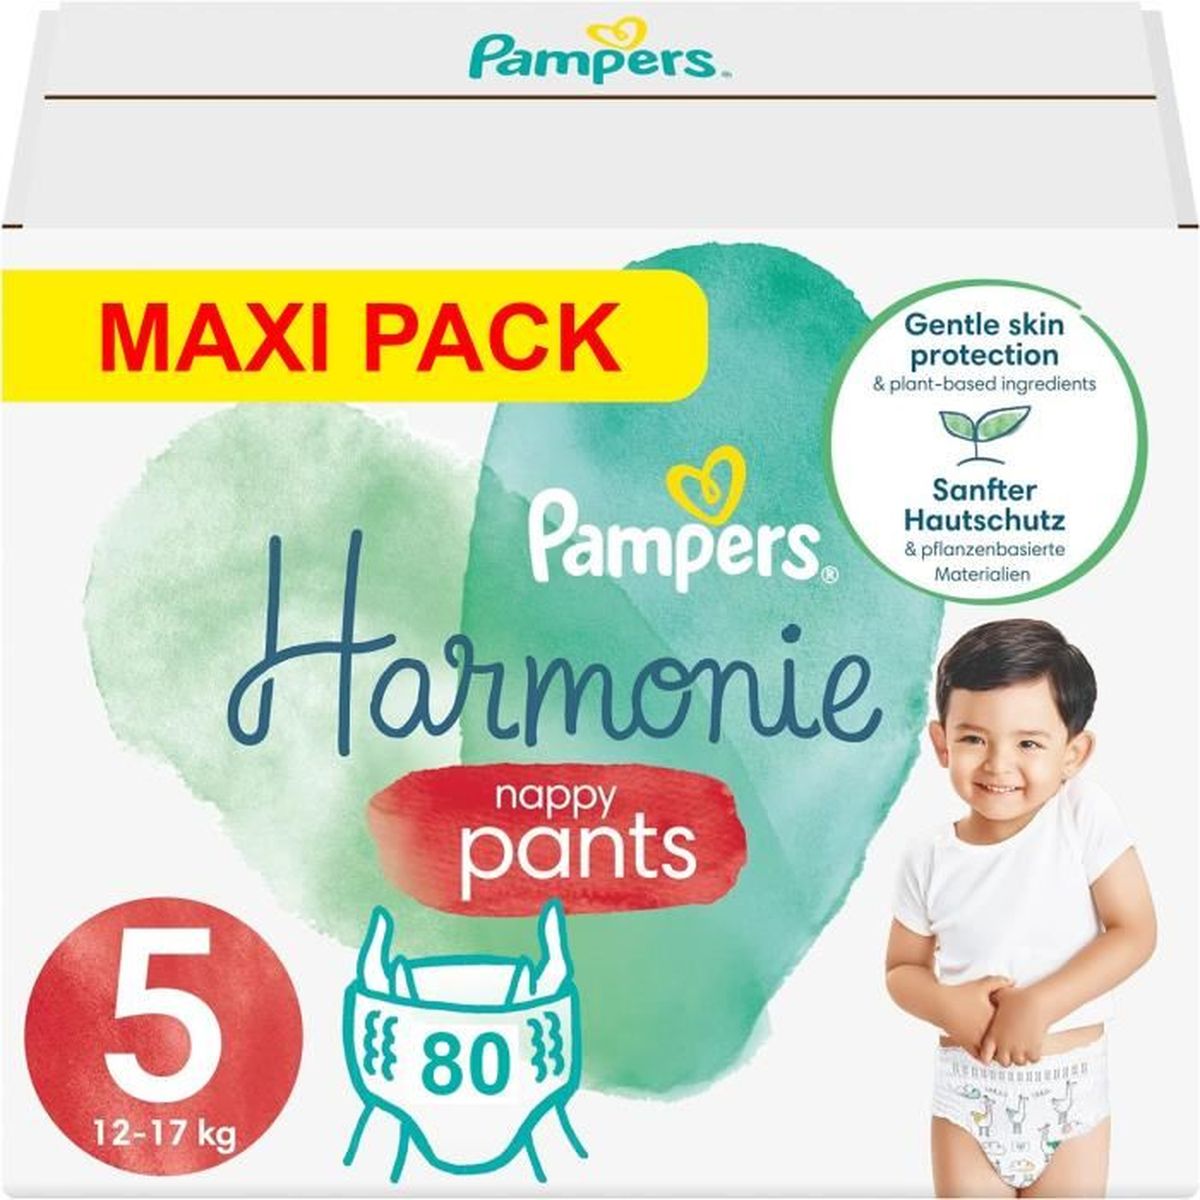 Couches Harmonie Taille 12-5kg x35 Pampers Harmonie